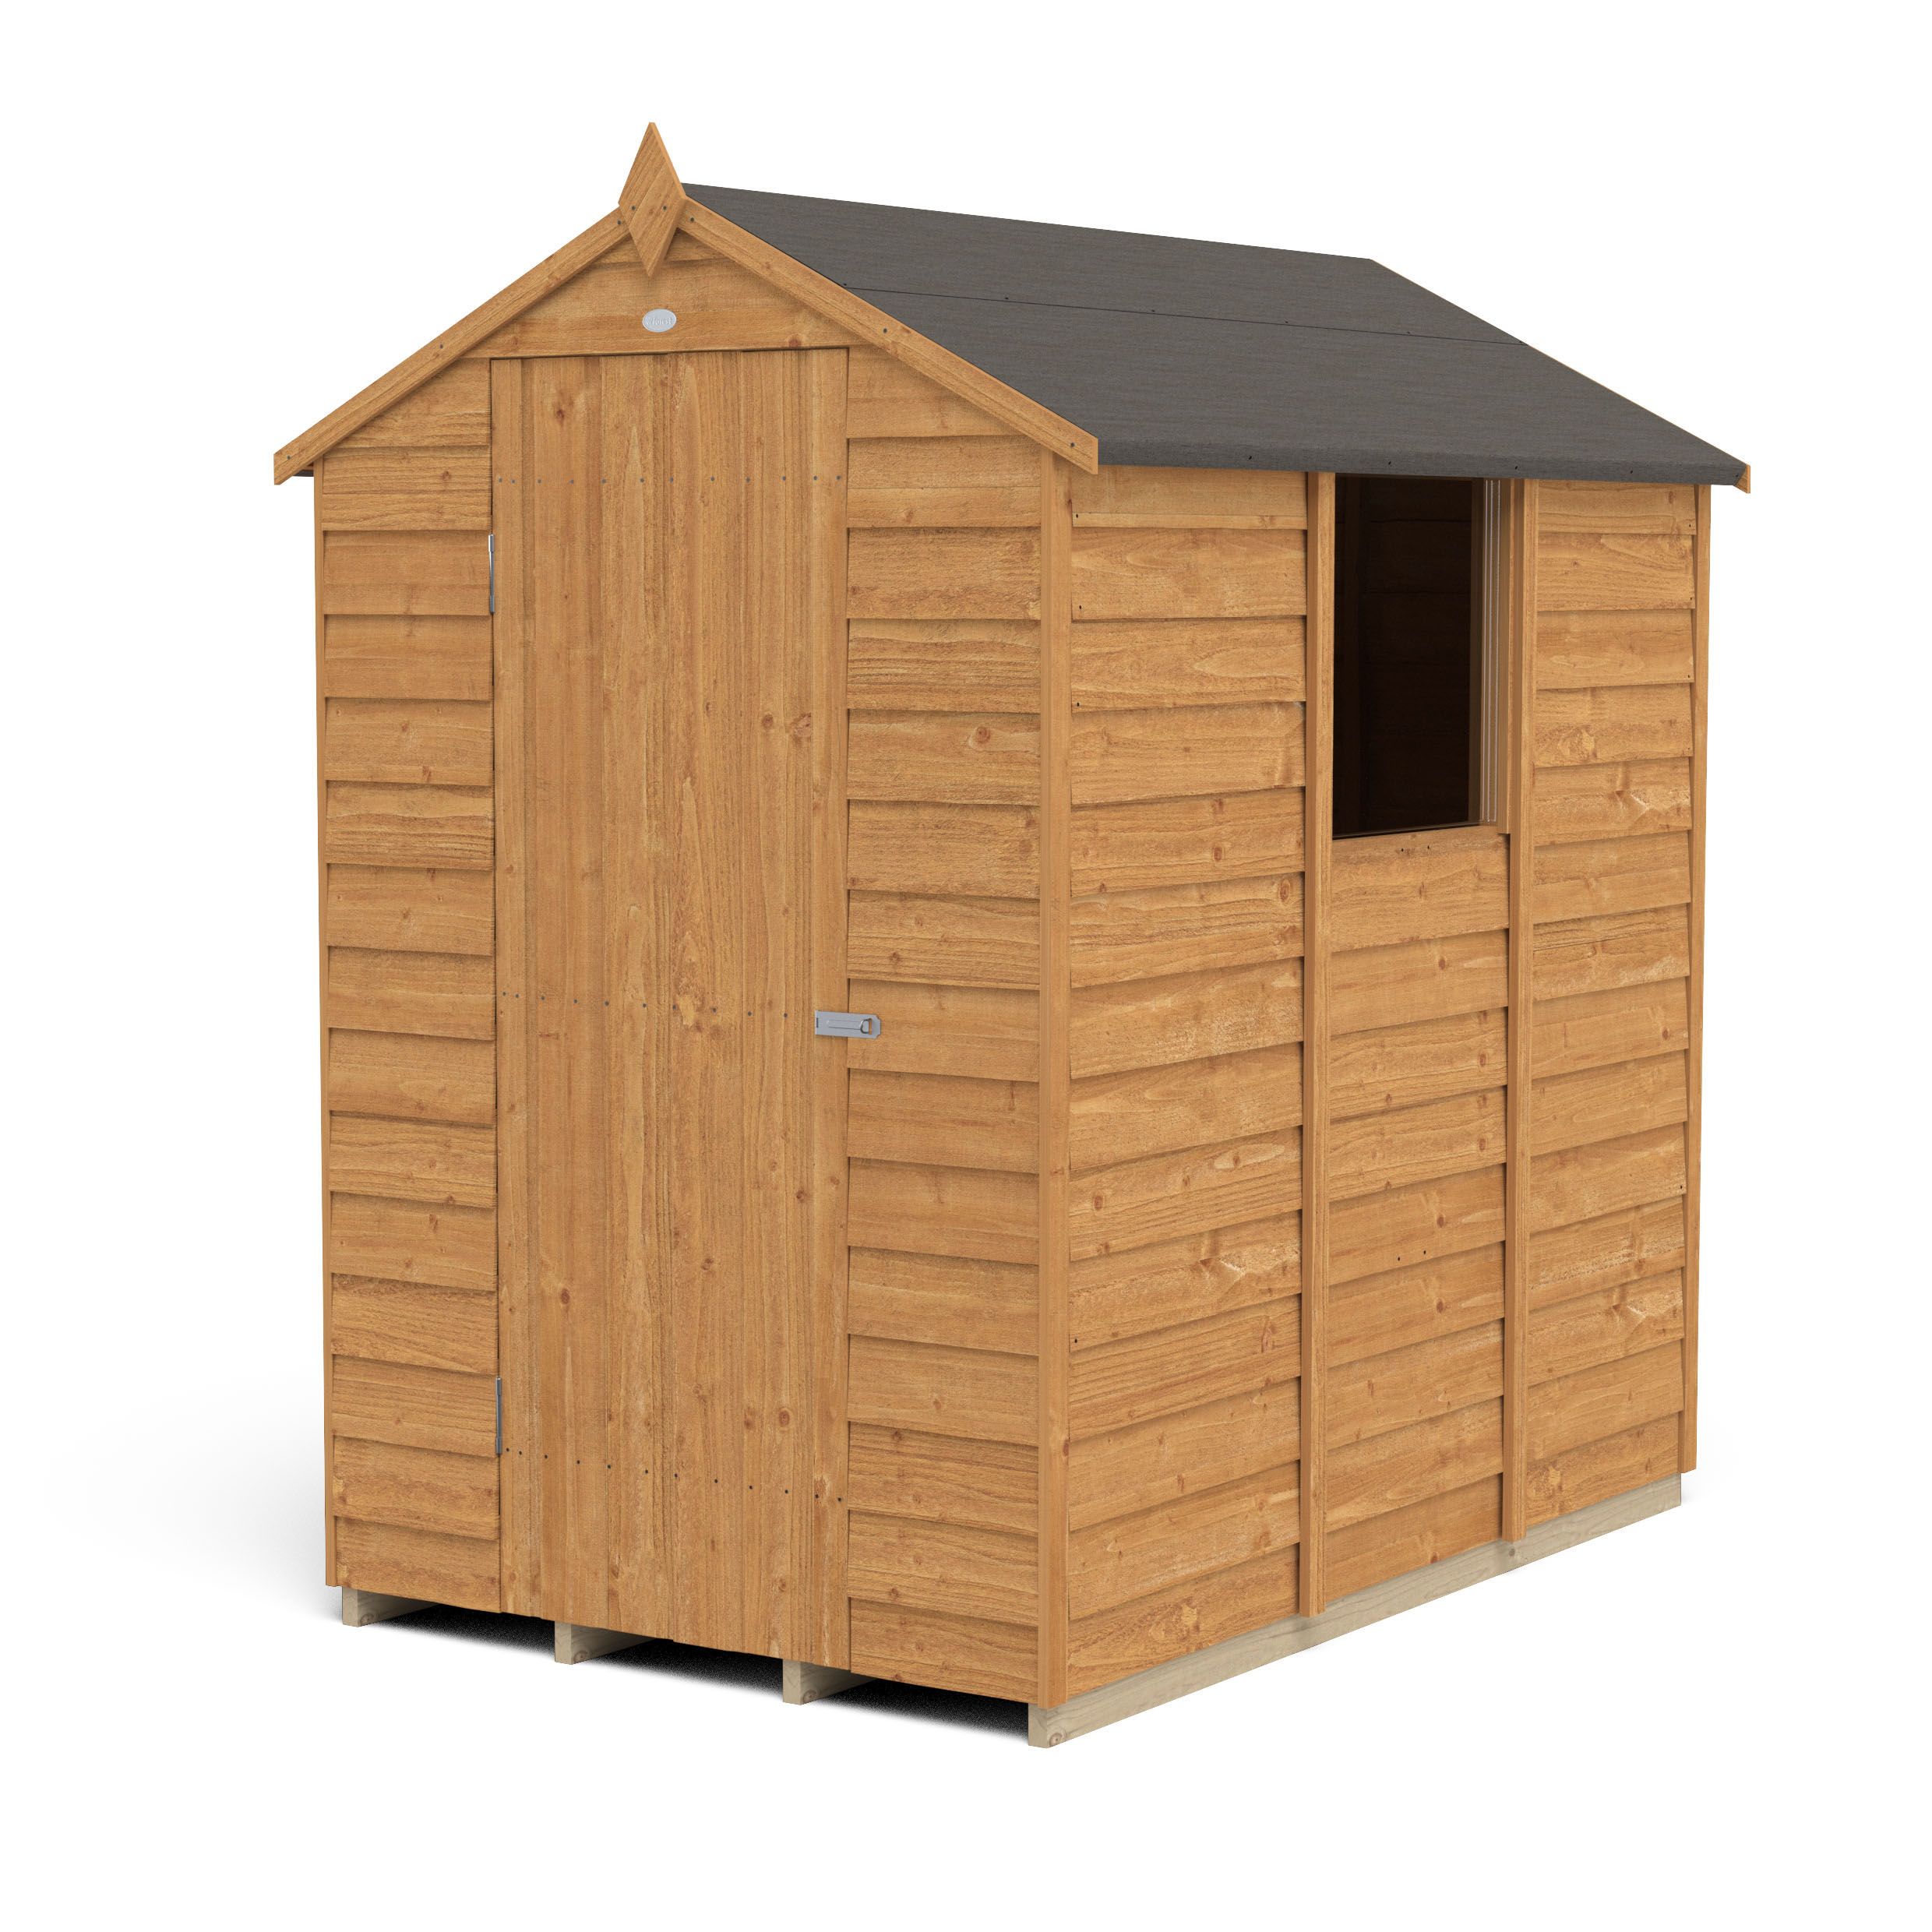 Forest Garden Overlap 6x4 ft Apex Wooden Dip treated Shed with floor & 1 window - Assembly service included